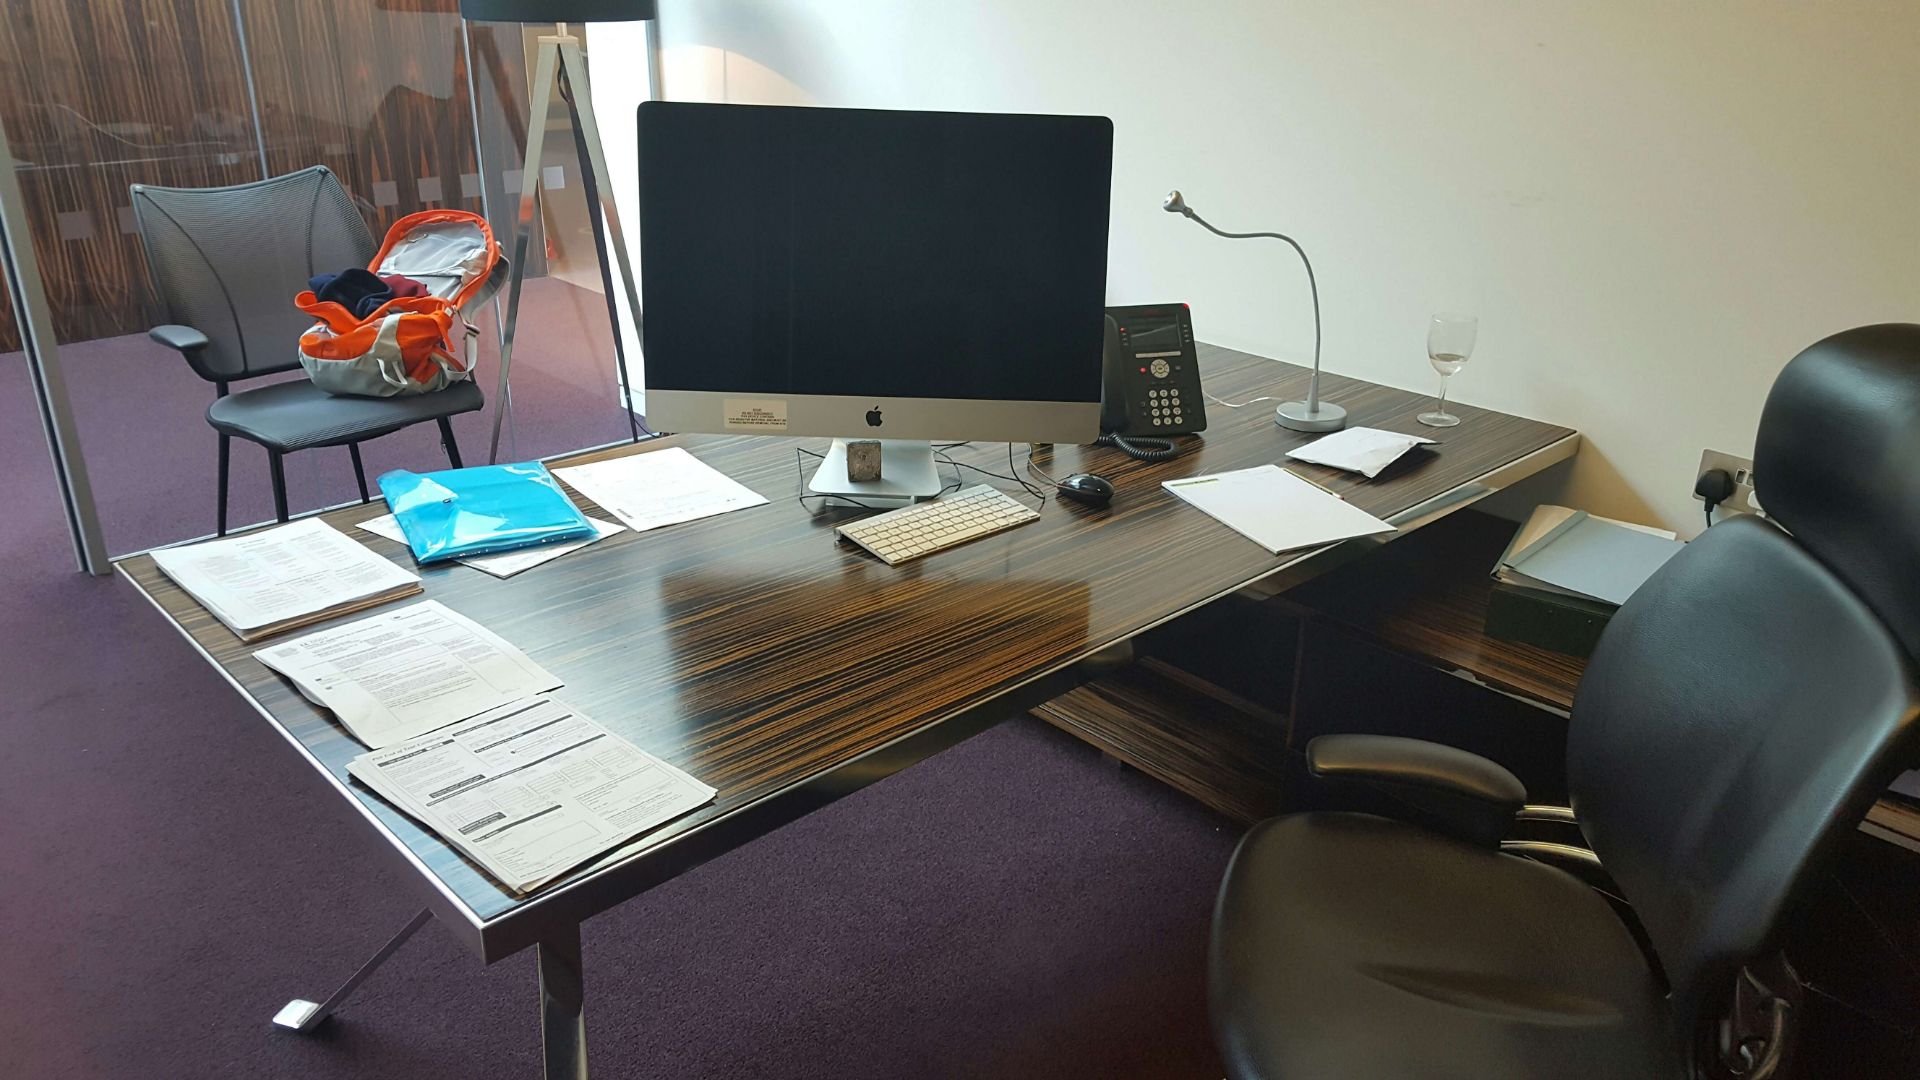 Designer Executive Desk Complete with Main User Skeleton Chair - Image 7 of 9